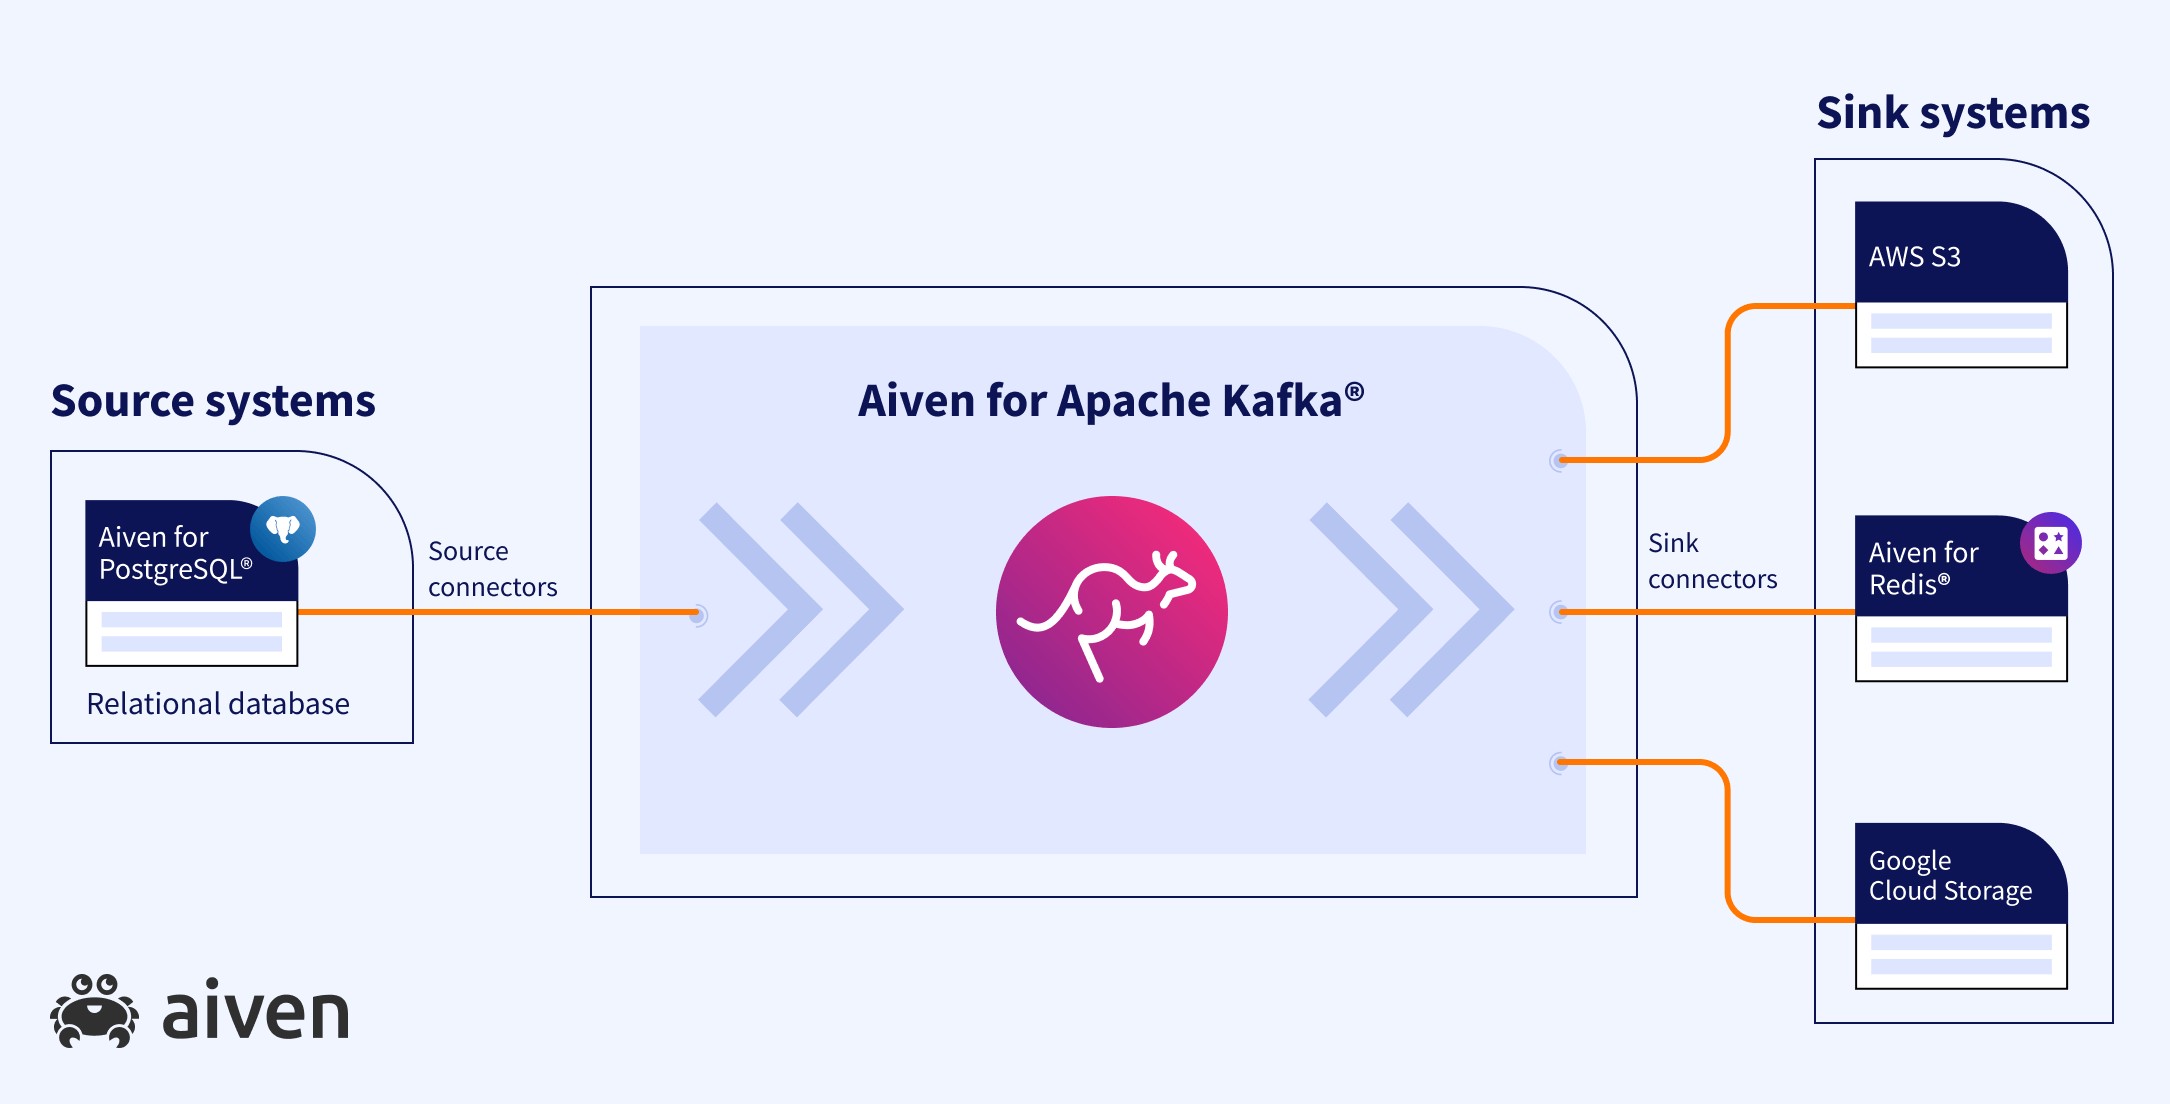 A diagram showing source data from PostgreSQL going into an Aiven for Apache Kafka service, and from there to sinks for AWS S3, Aiven for Redis and Google Cloud Storage